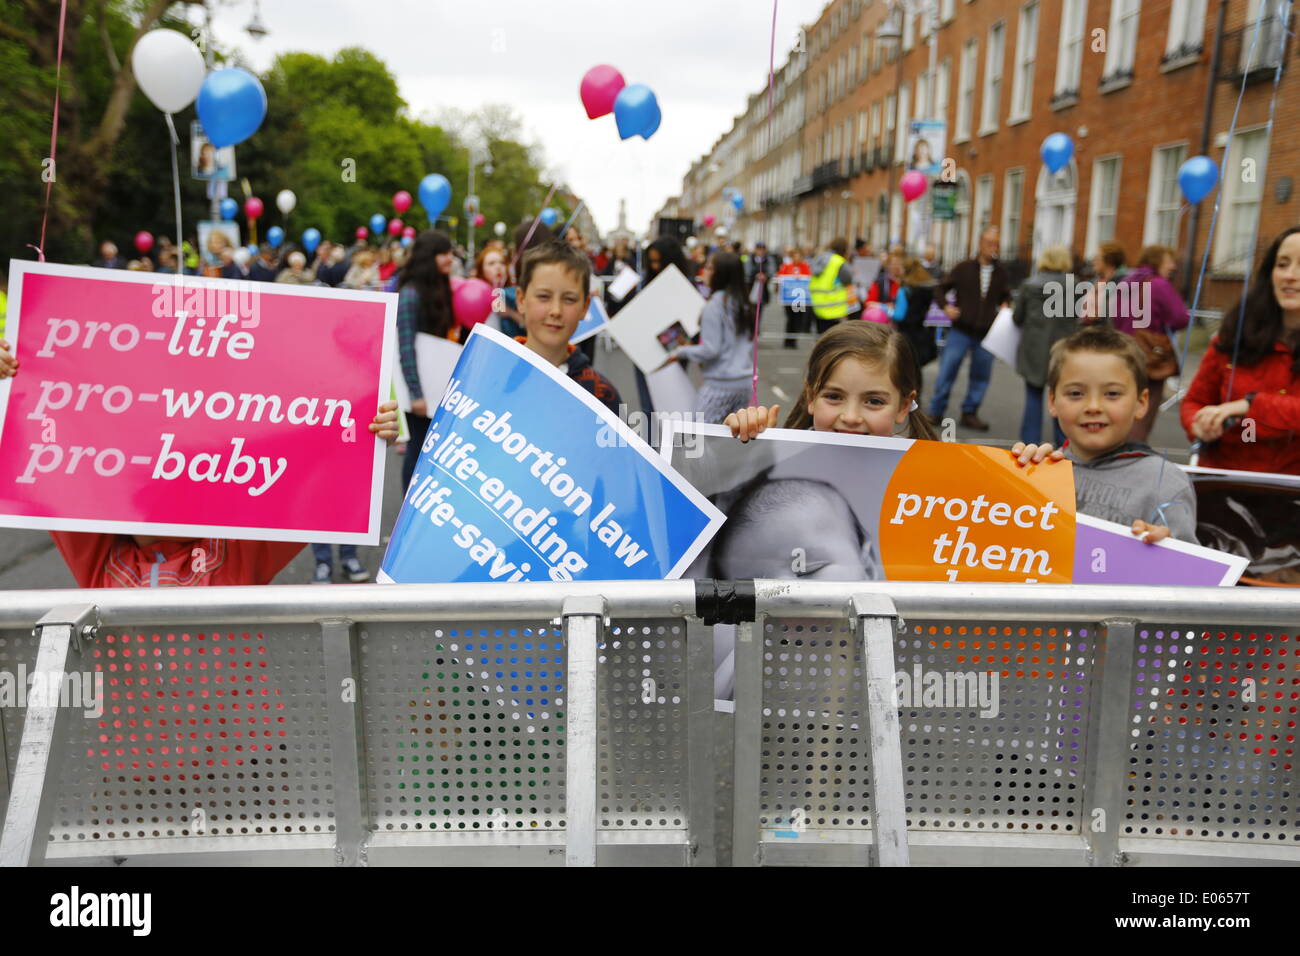 Dublin, Ireland. 3rd May 2014. Four children hold anti-abortion posters at the 'National Vigil for Life'. Thousands turned up for the 'National Vigil for Life' in Dublin's Merrion Square to call politicians for a repeal of the Protection of Life During Pregnancy Bill 2013 which allows abortion in Ireland in limited circumstances. Stock Photo